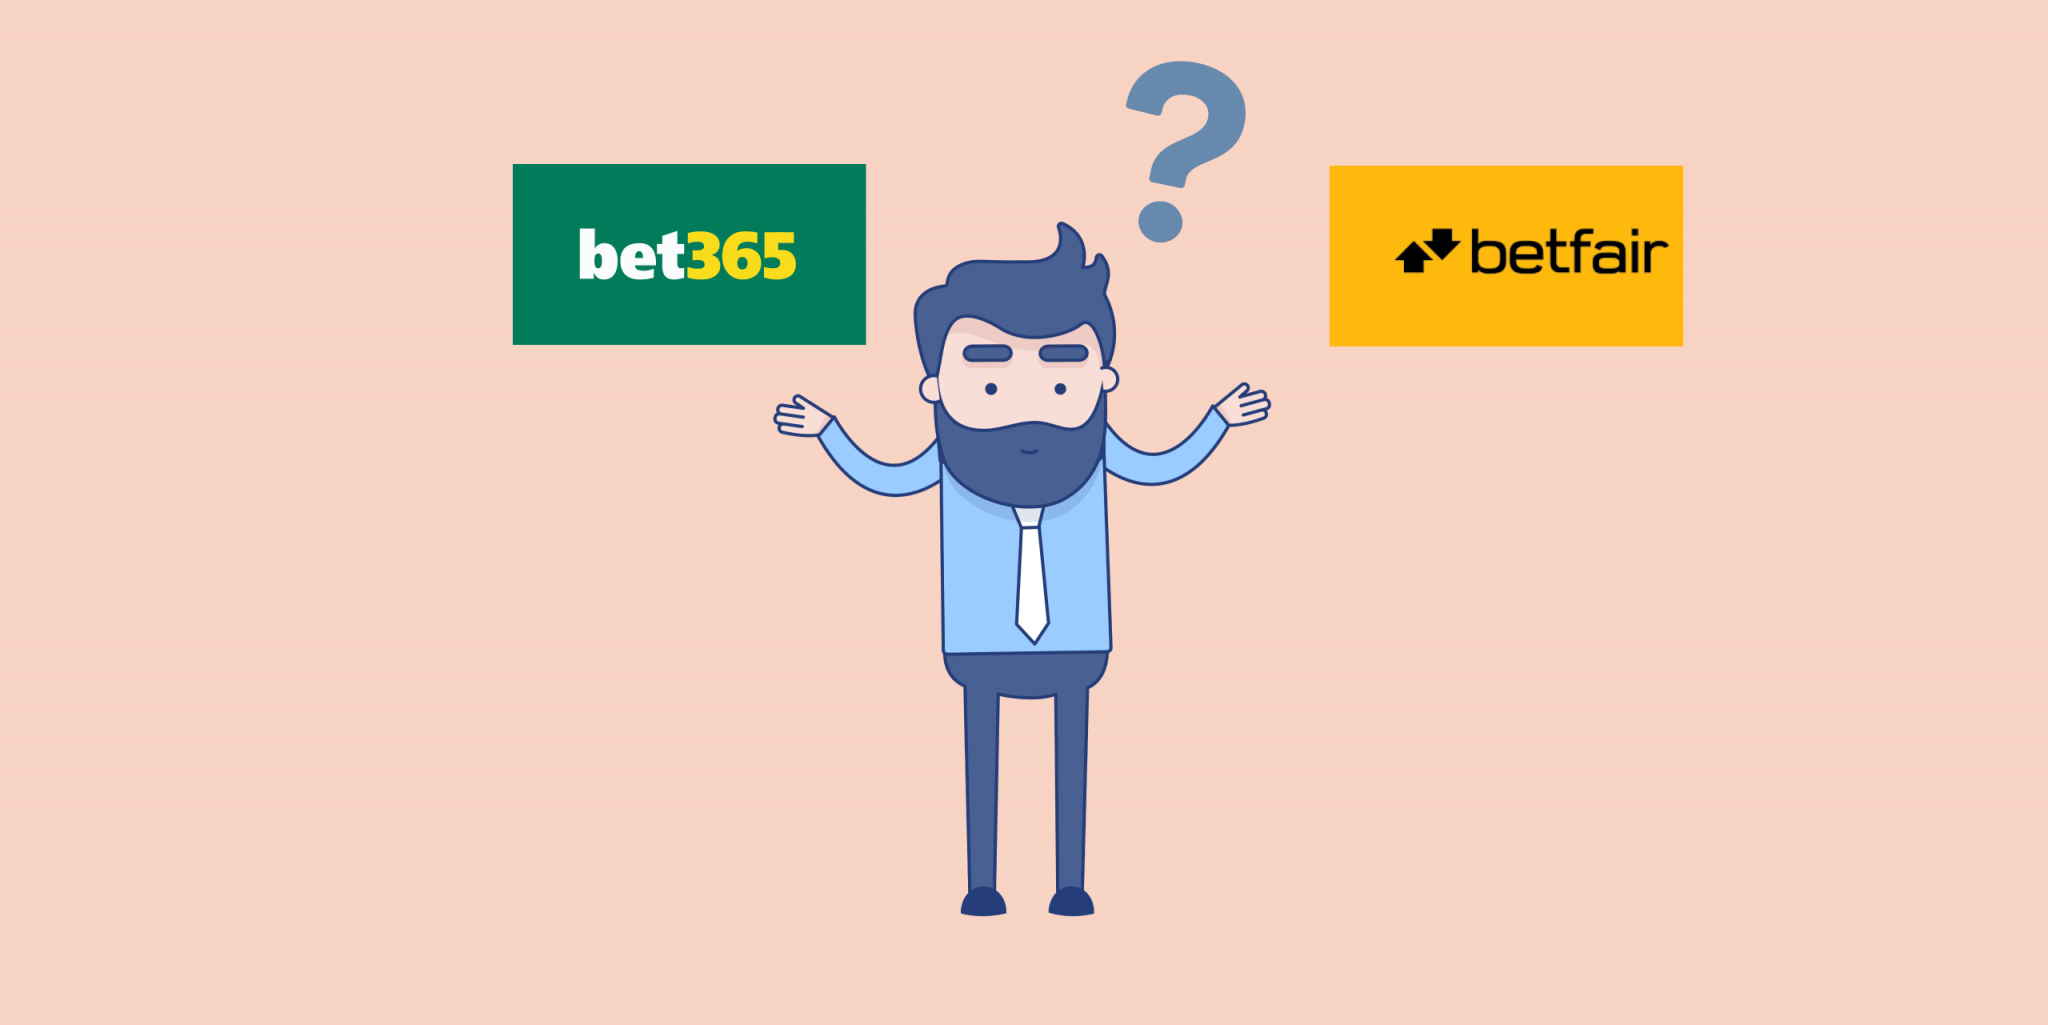 Traditional Bookmakers or Betting Exchanges? – Which one should I choose?